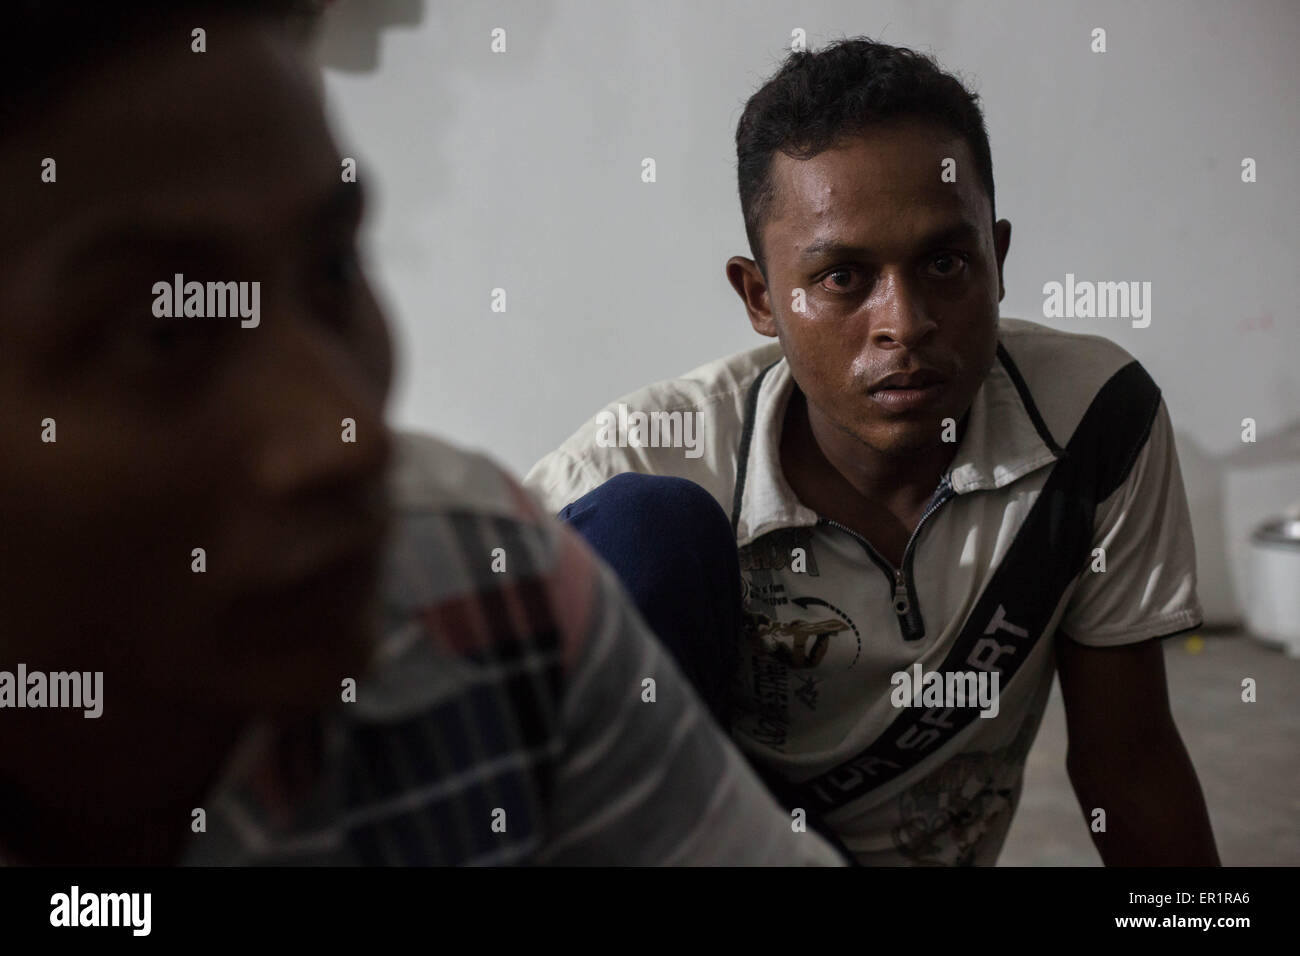 Langkawi, Malaysia. 20th May, 2015. Rohingya men gathered inside an abandoned building, after their end of work day.Muhammad Basin (right), he's 22 years old and he arrived here in Langkawi 7 month ago, he have no ID card or UN card.Sabri Halam (left), he's 20 years old and he's the brother of Mohamad Robil Alam.In Kuah district, not too far from the touristic area of Langkawi Island, and close from the airport.9 Rohingyas men aged between 15 and 26 years old, share a flat inside an abandoned building owned by their employer which they work for.After fleeing their own country (Myanmar) ' Stock Photo